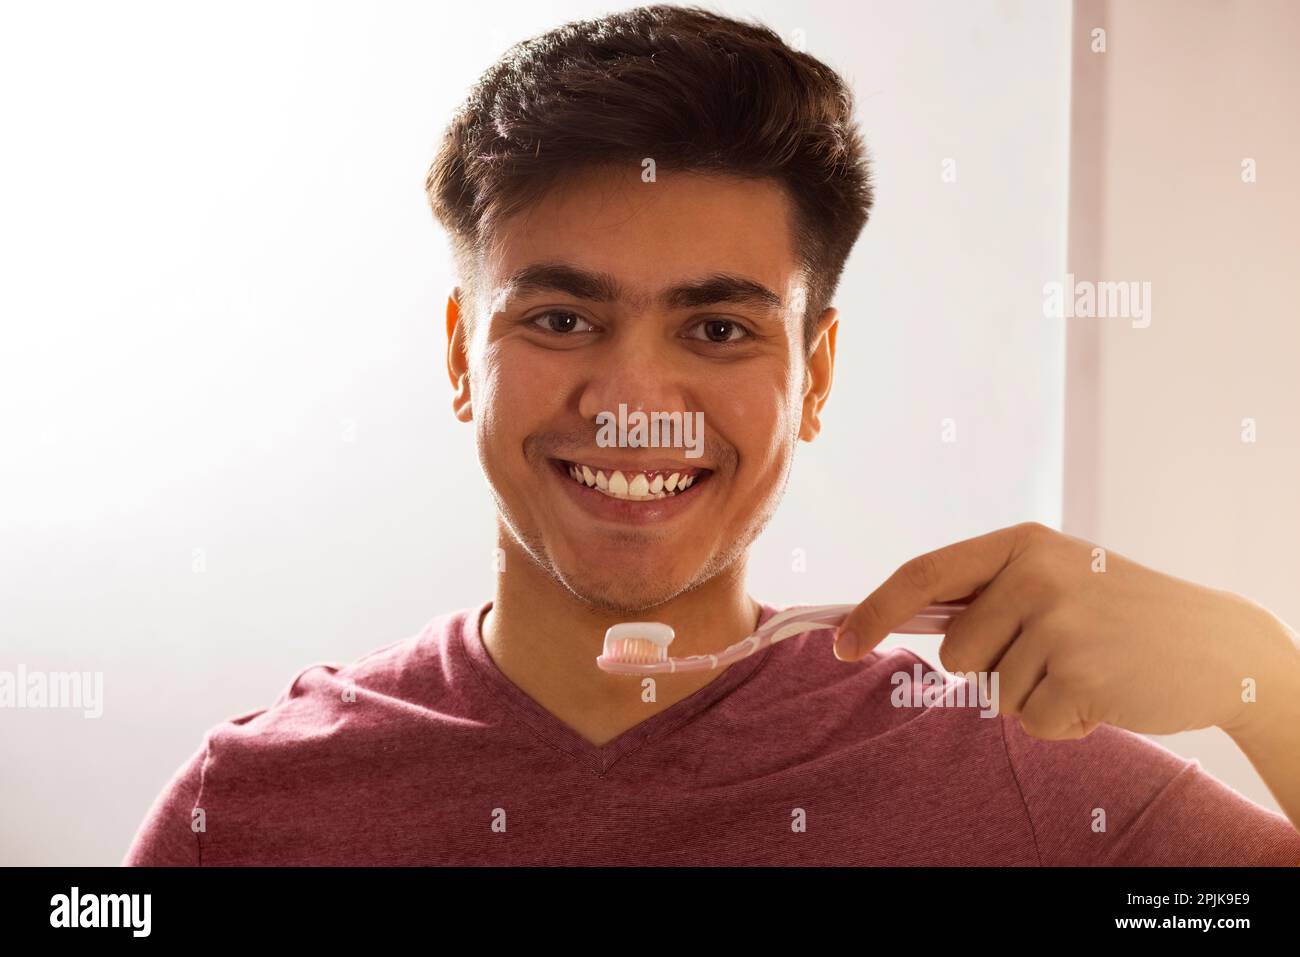 Close-up portrait of a smiling man brushing his teeth Stock Photo